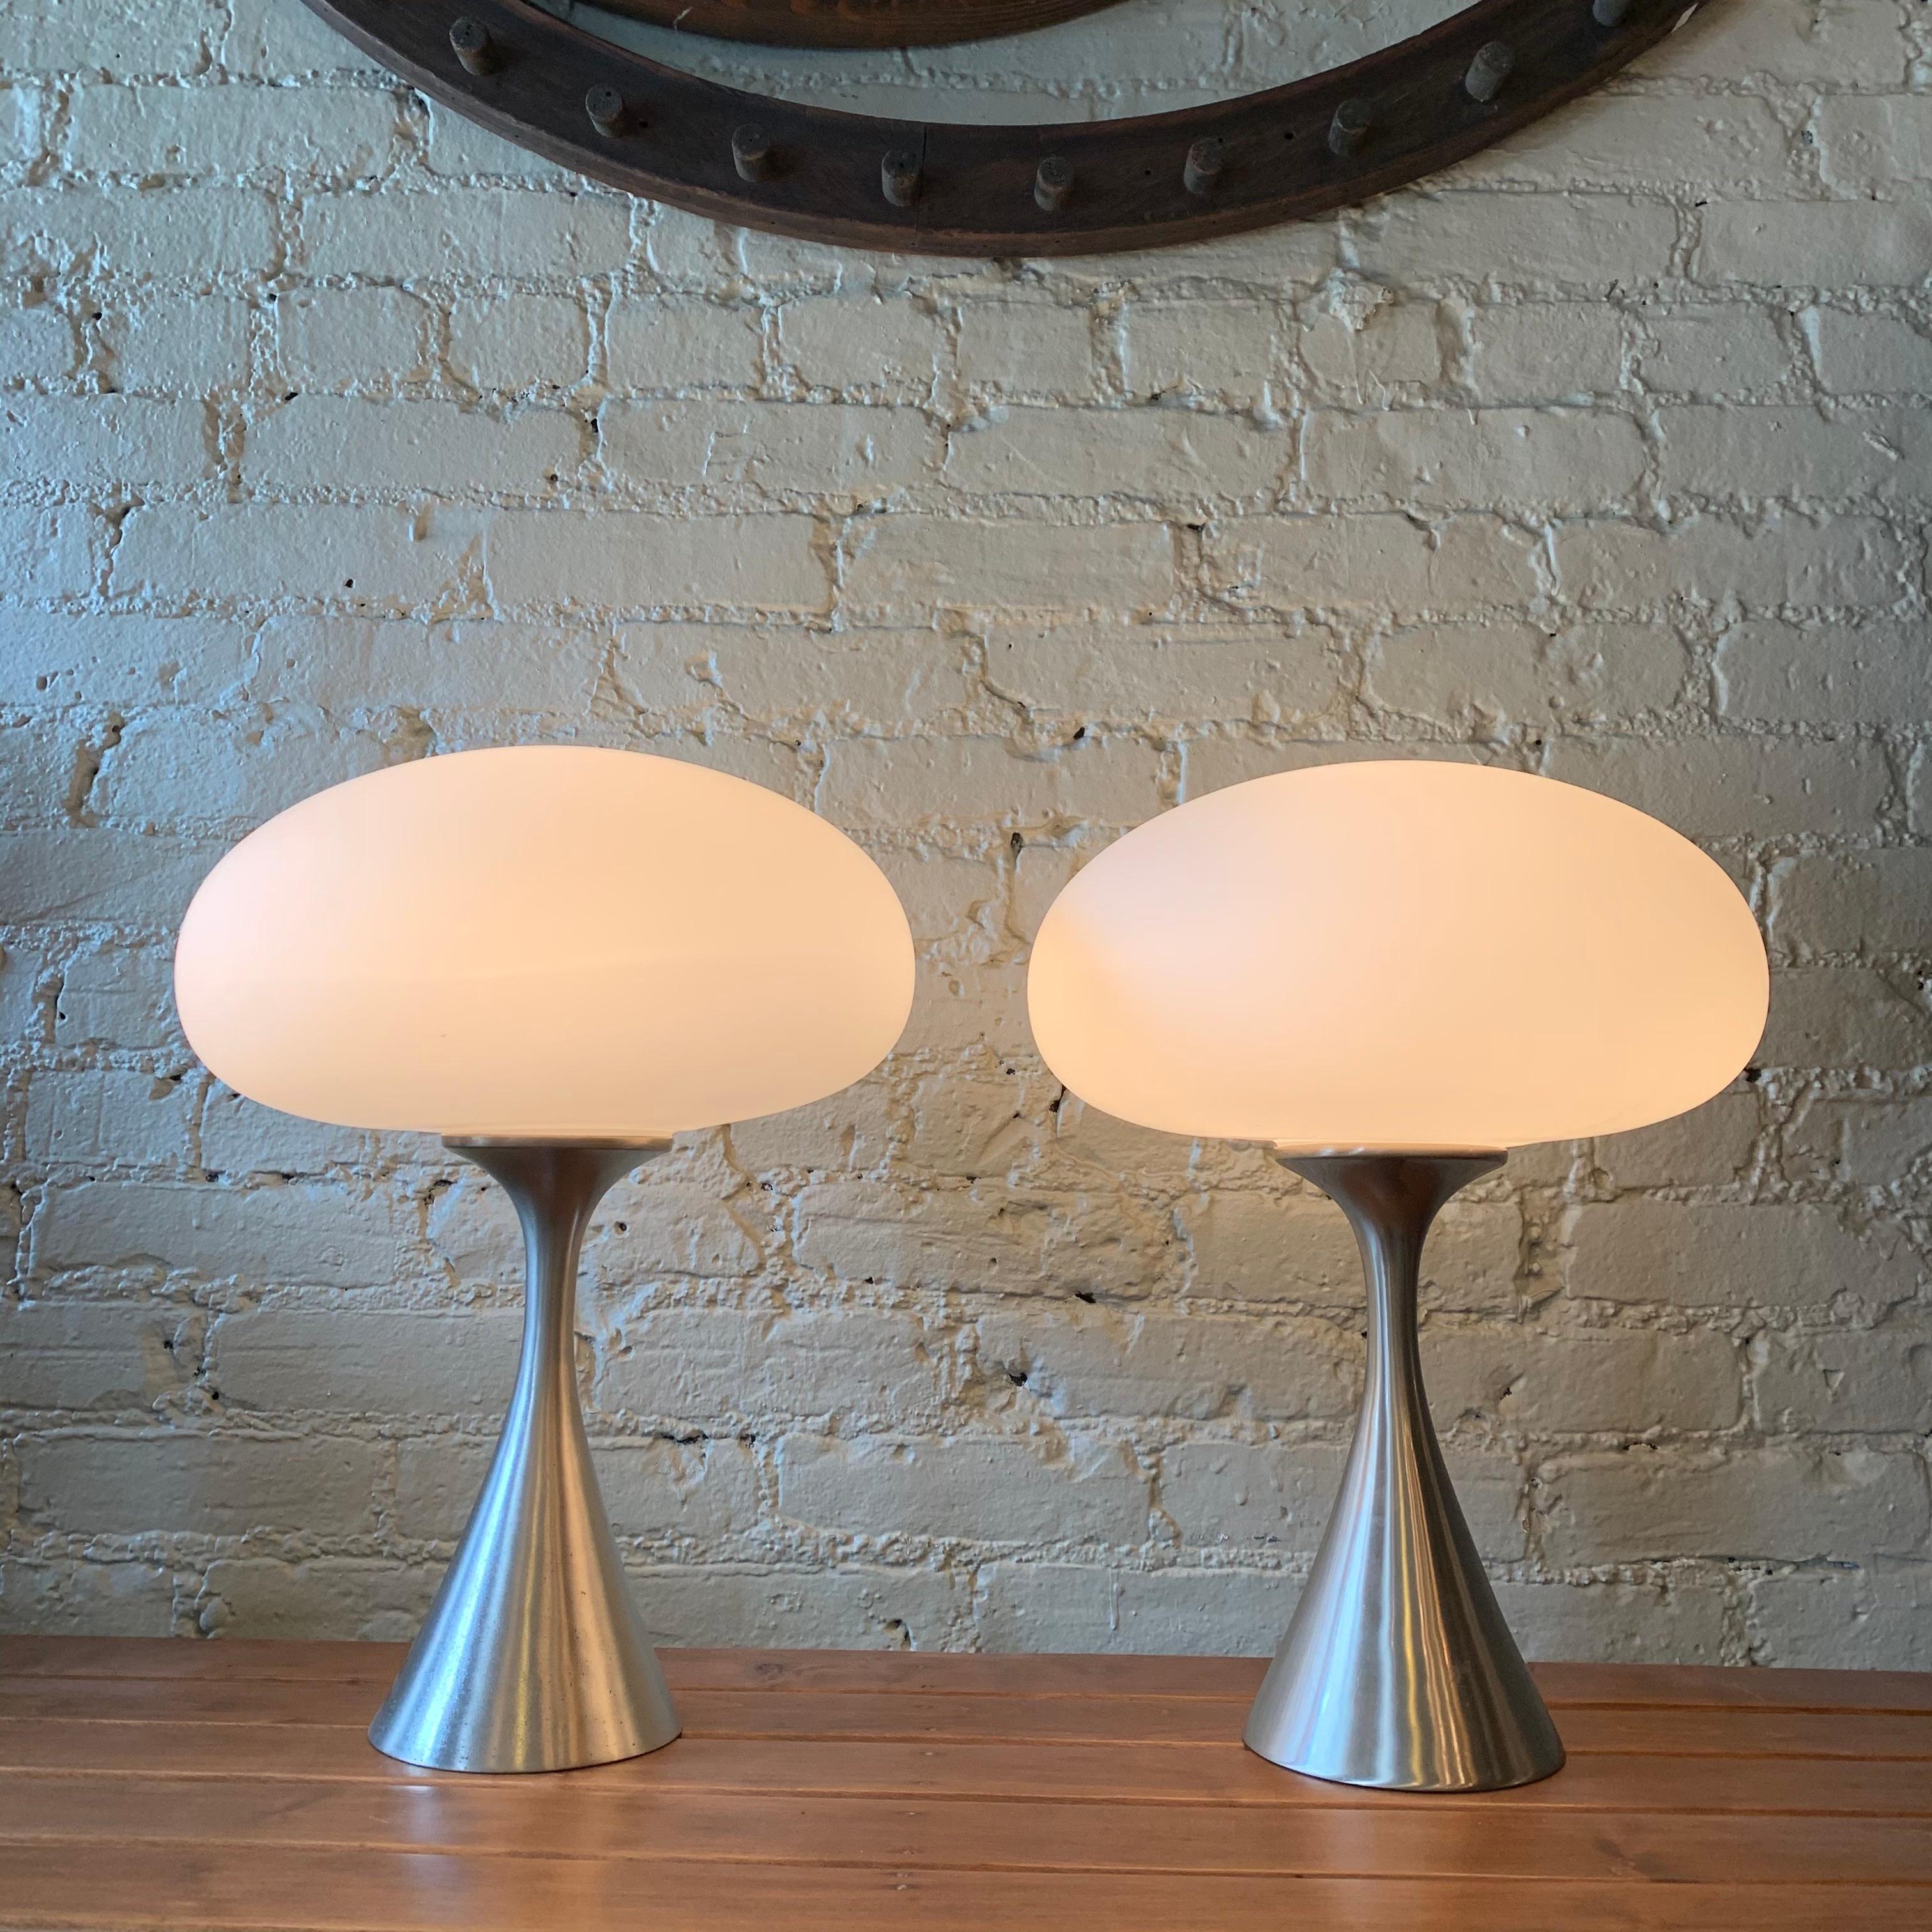 Mid-Century Modern Pair of Brushed Aluminum Mushroom Table Lamps by Bill Curry for Laurel